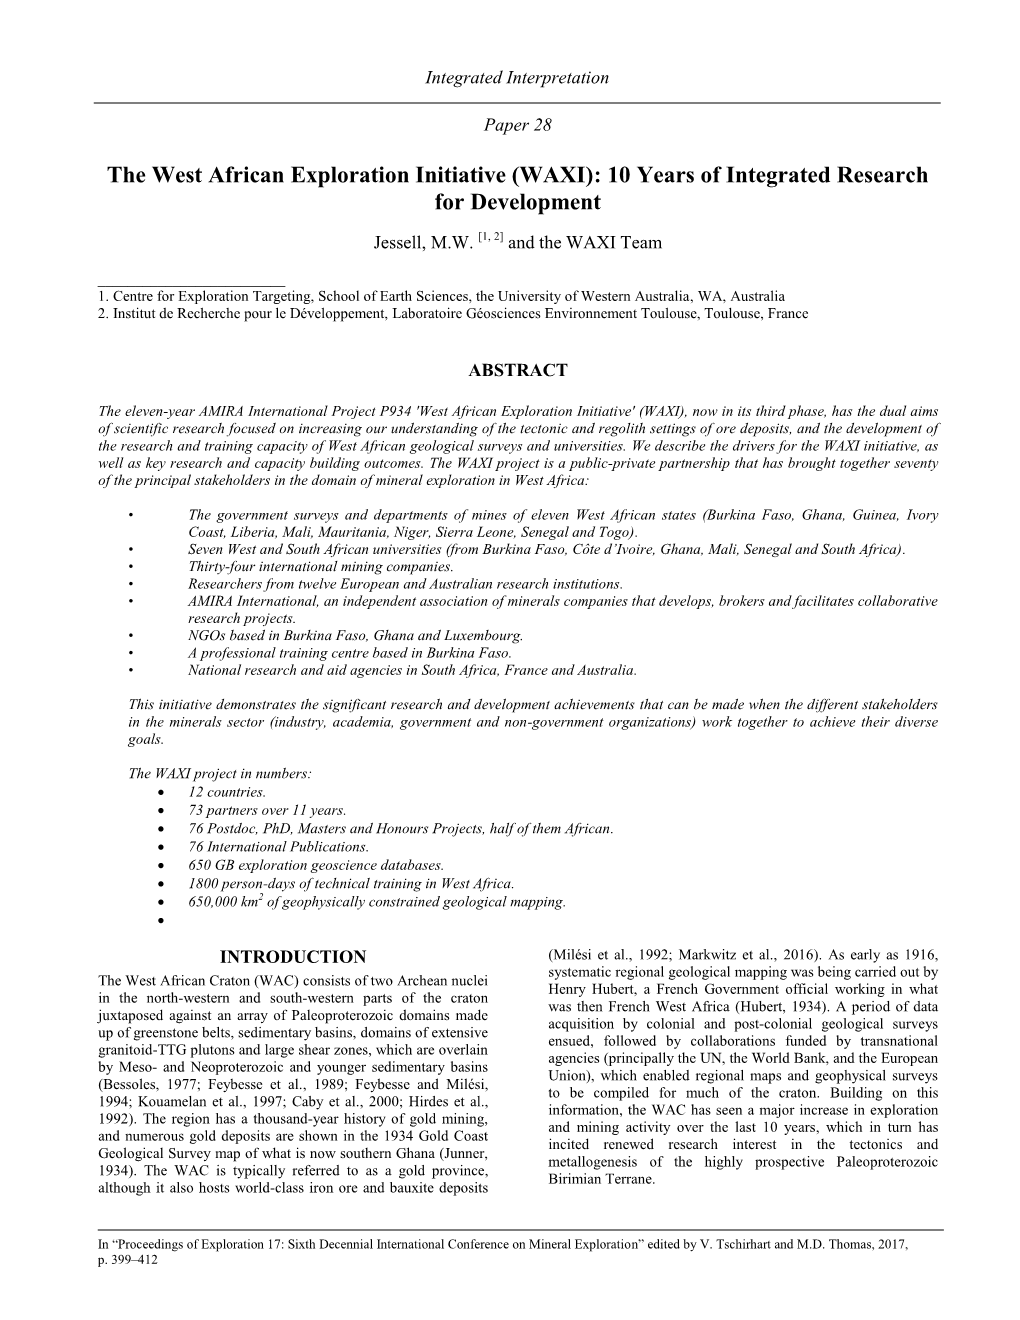 The West African Exploration Initiative (WAXI): 10 Years of Integrated Research for Development